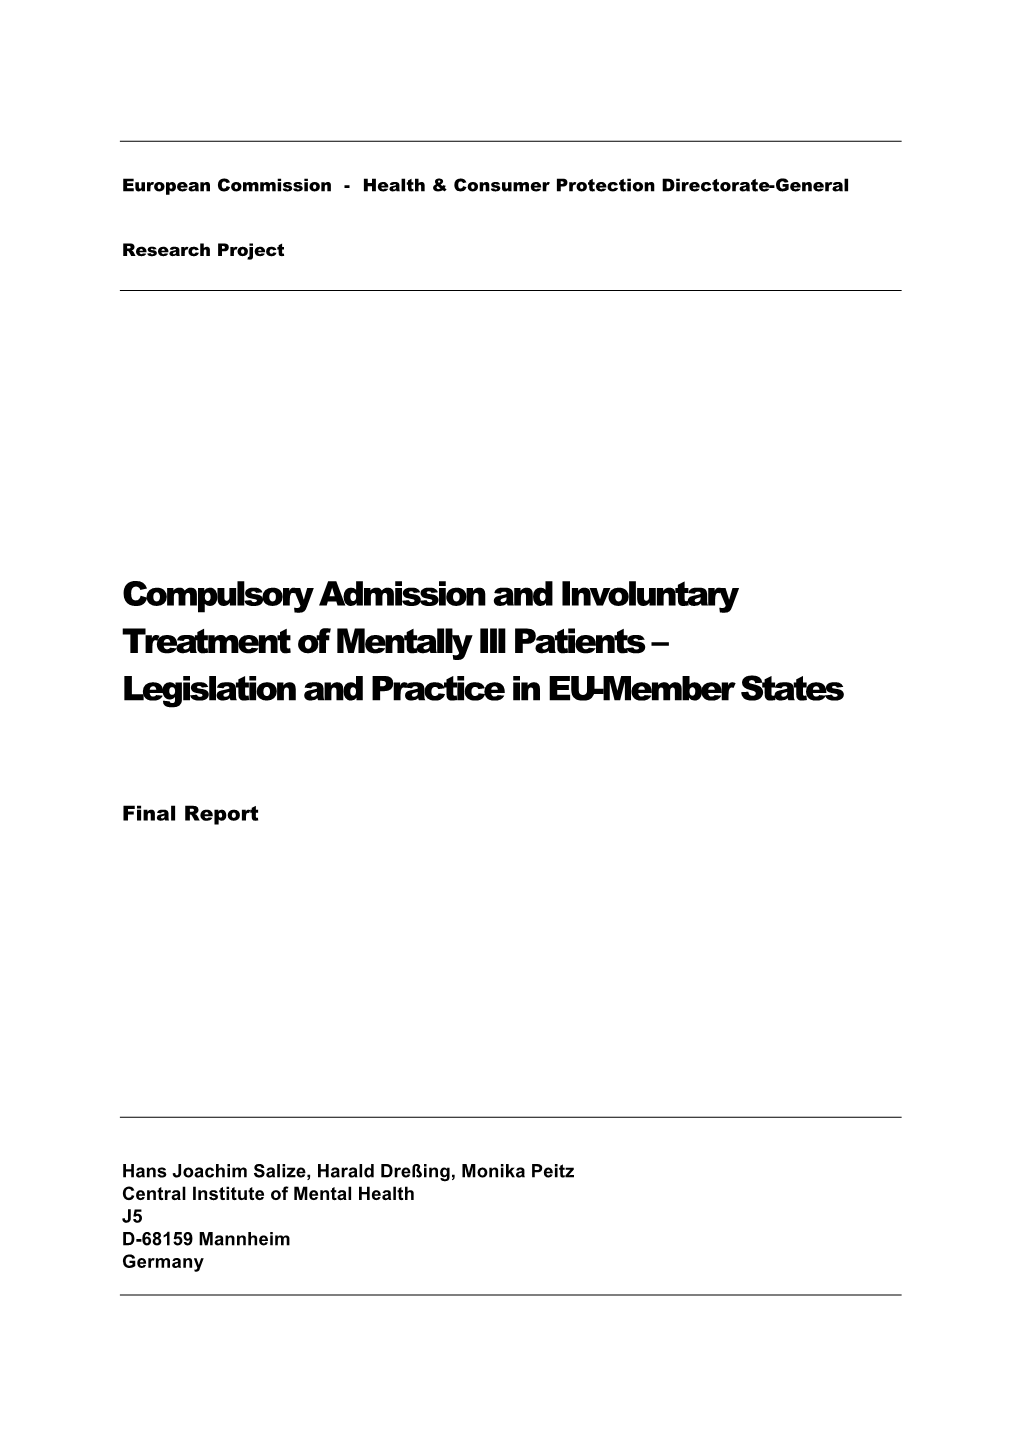 Compulsory Admission and Involuntary Treatment of Mentally Ill Patients – Legislation and Practice in EU-Member States